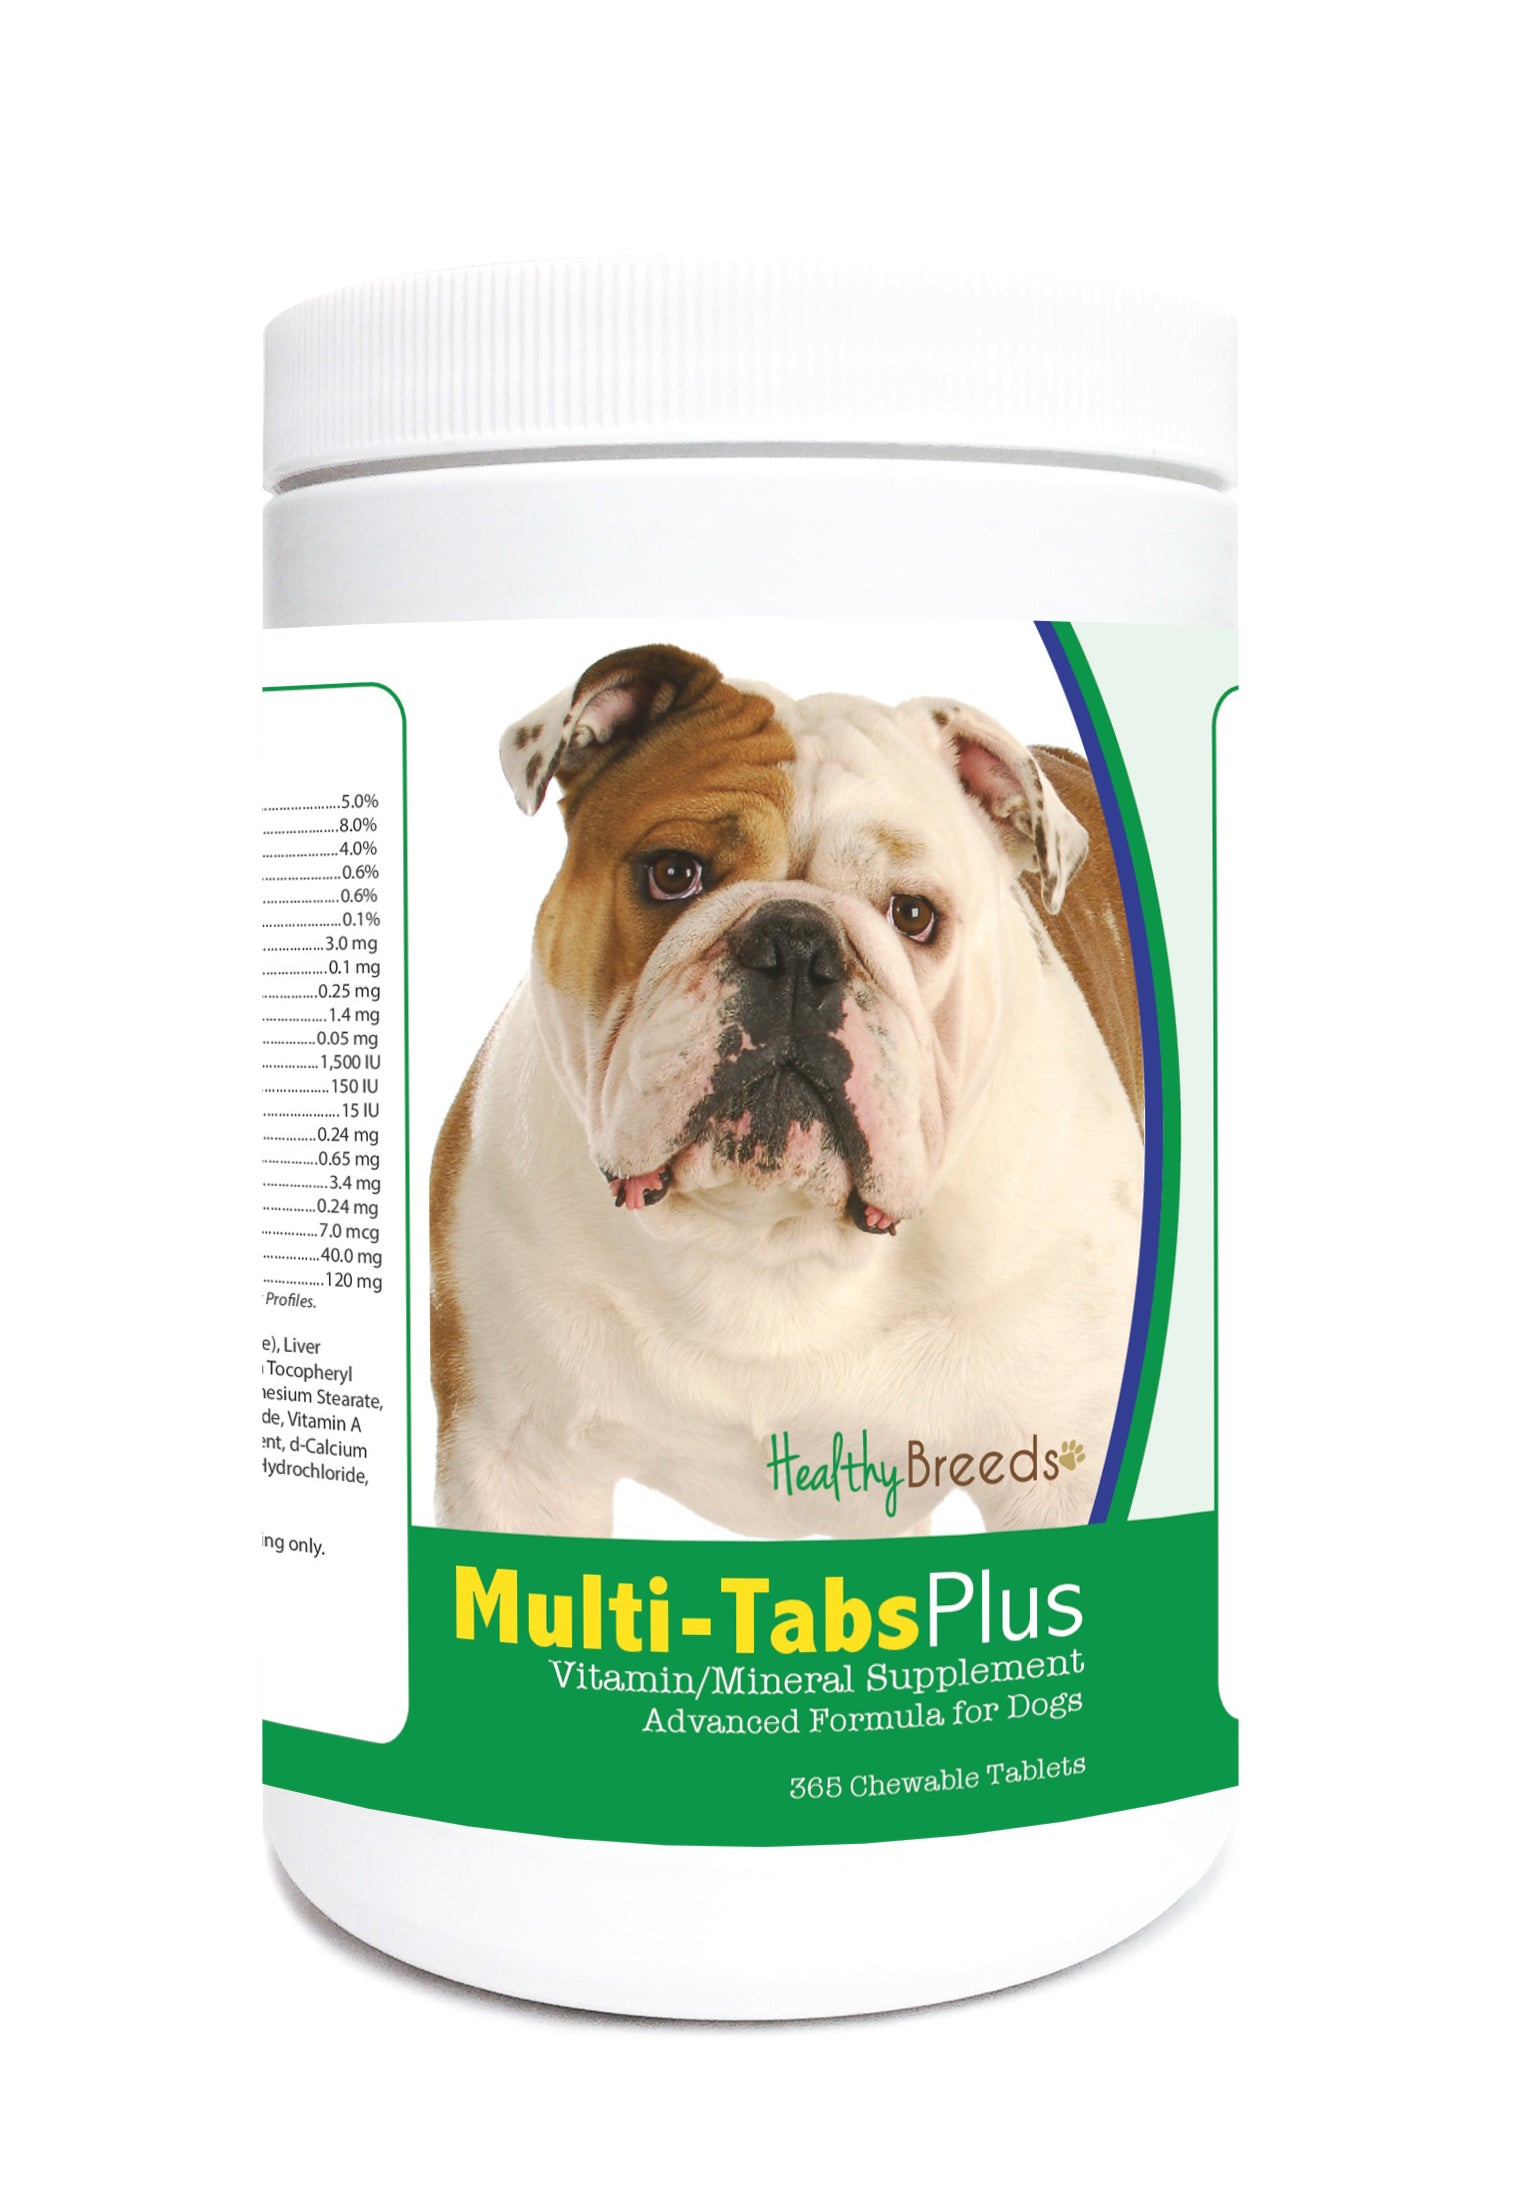 Bulldog Multi-Tabs Plus Chewable Tablets 365 Count